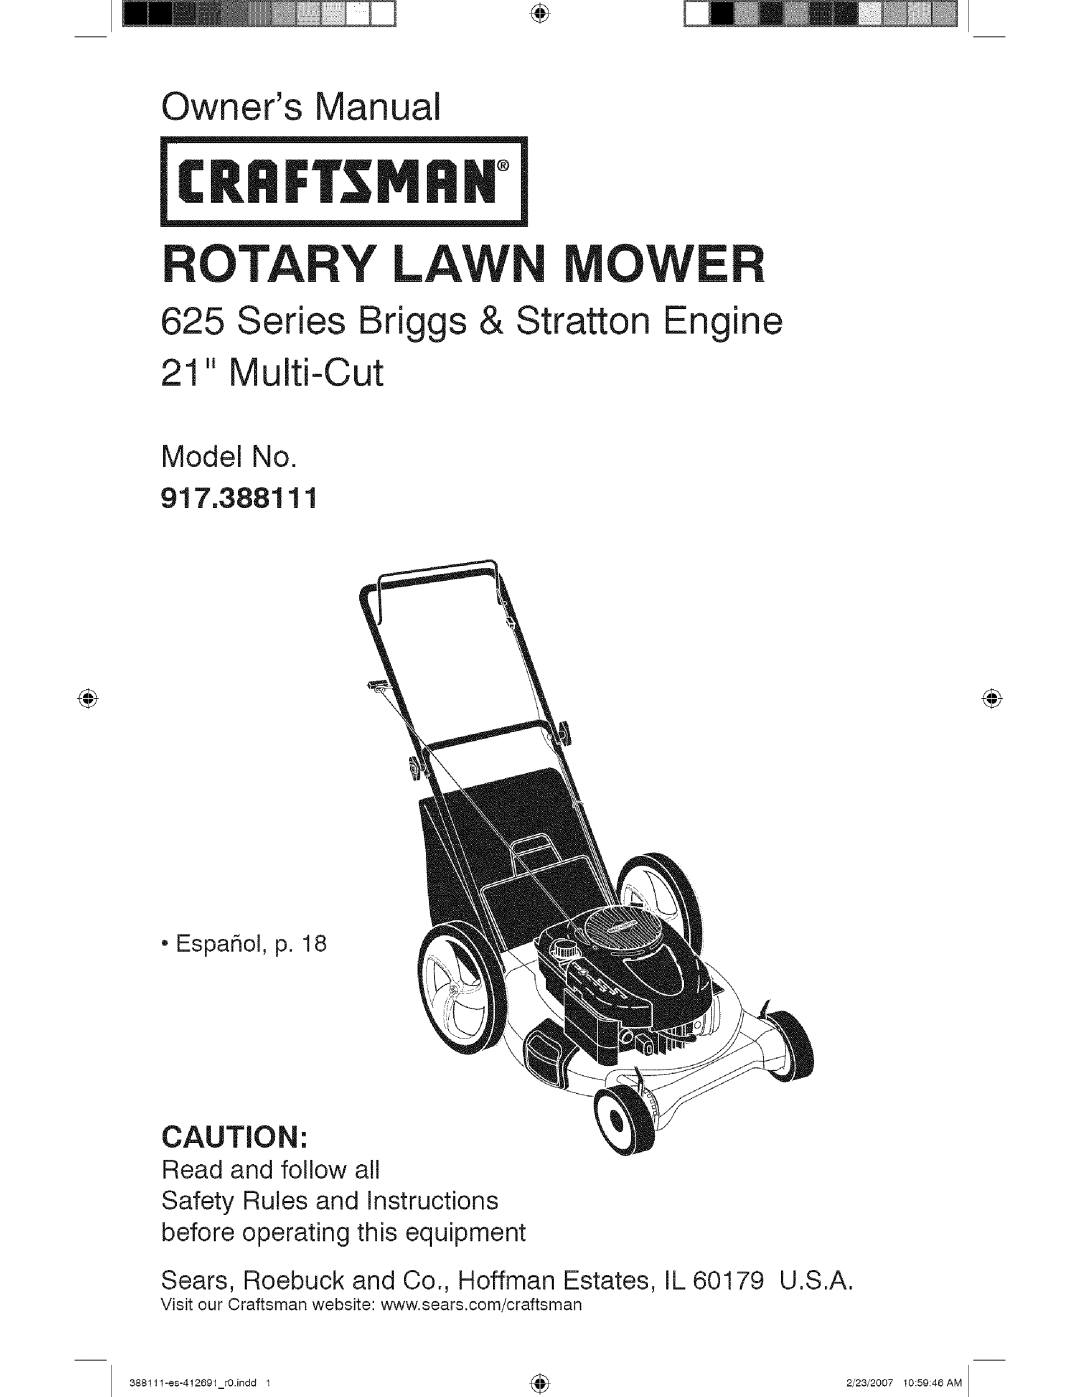 Craftsman 917 388111 owner manual Model No, Rotary Lawn Mower, Owners Manual, Series Briggs & Stratton Engine 21 Multi-Cut 